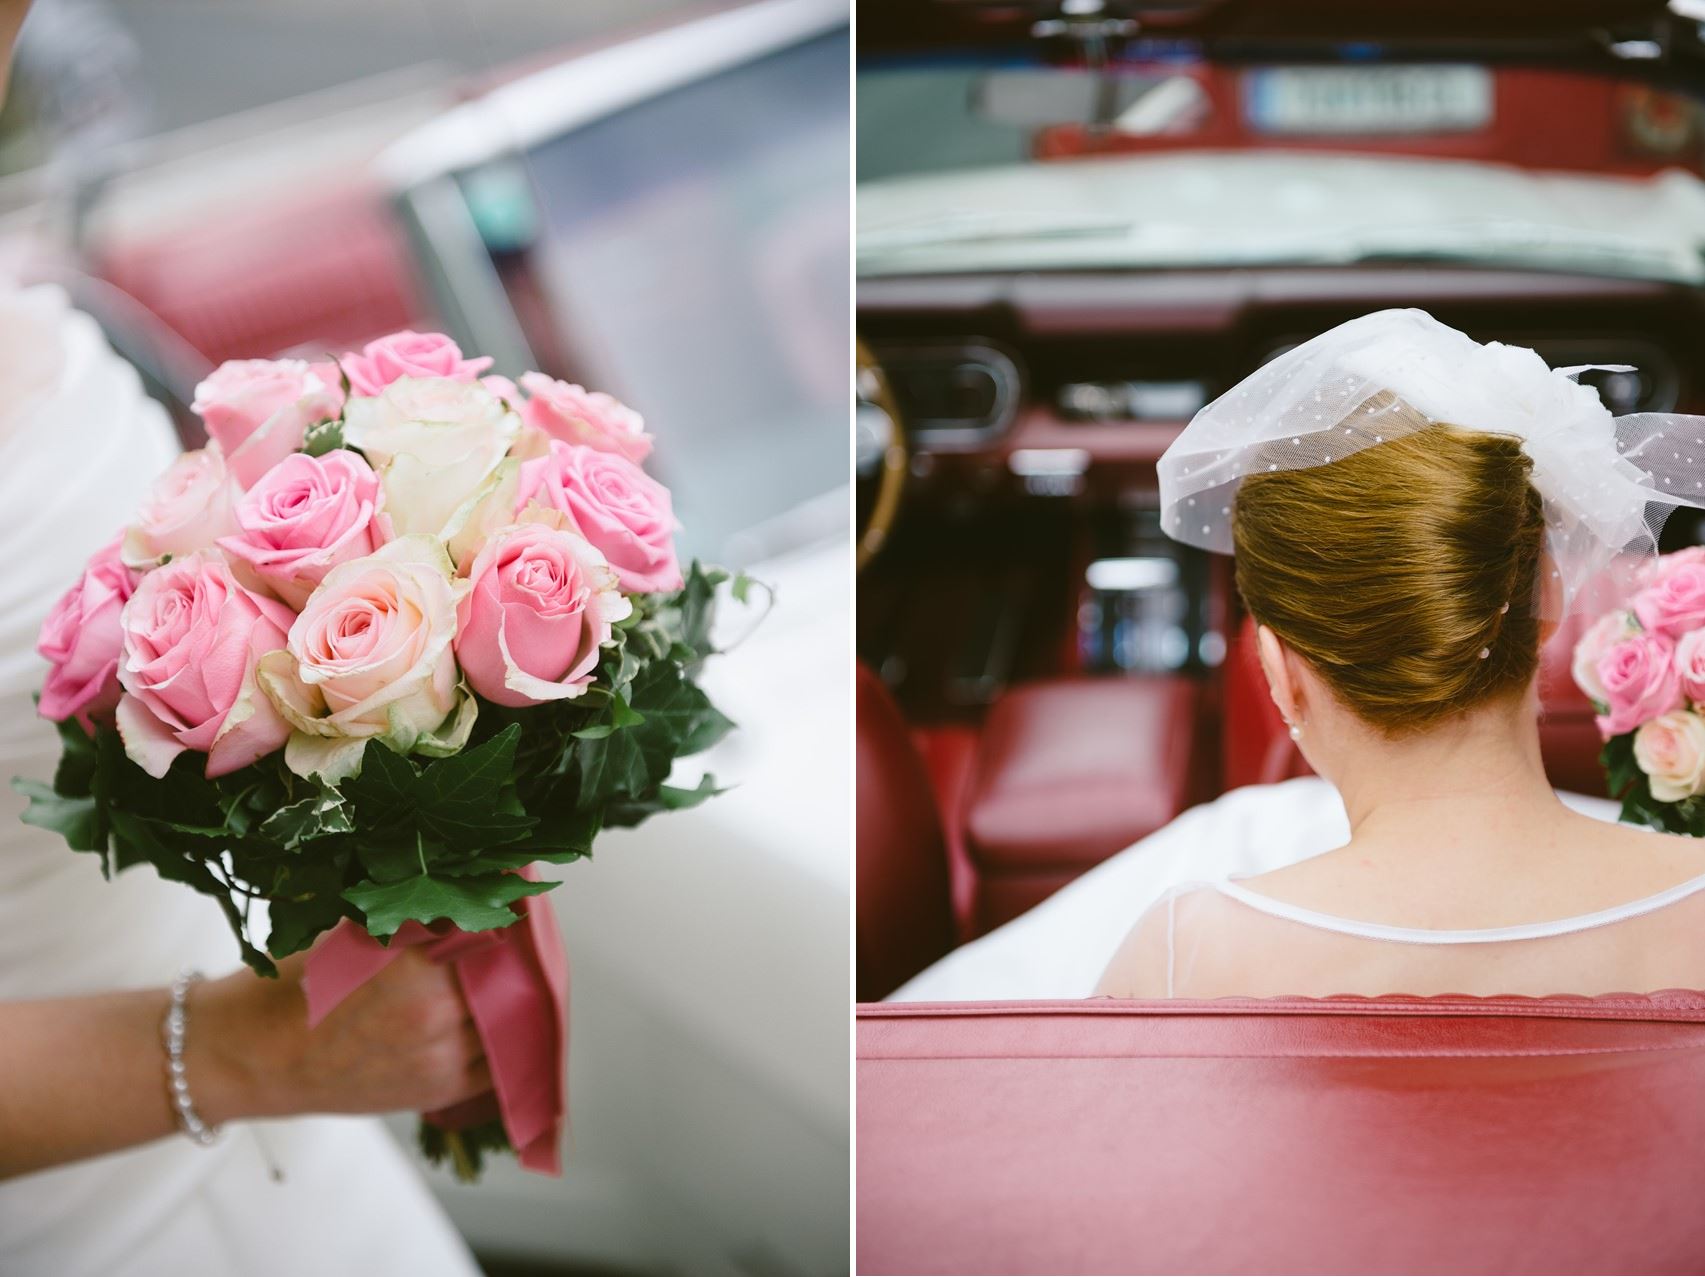 1950s Inspired Bride - A Sweet 1950s Inspired Wedding in Vienna